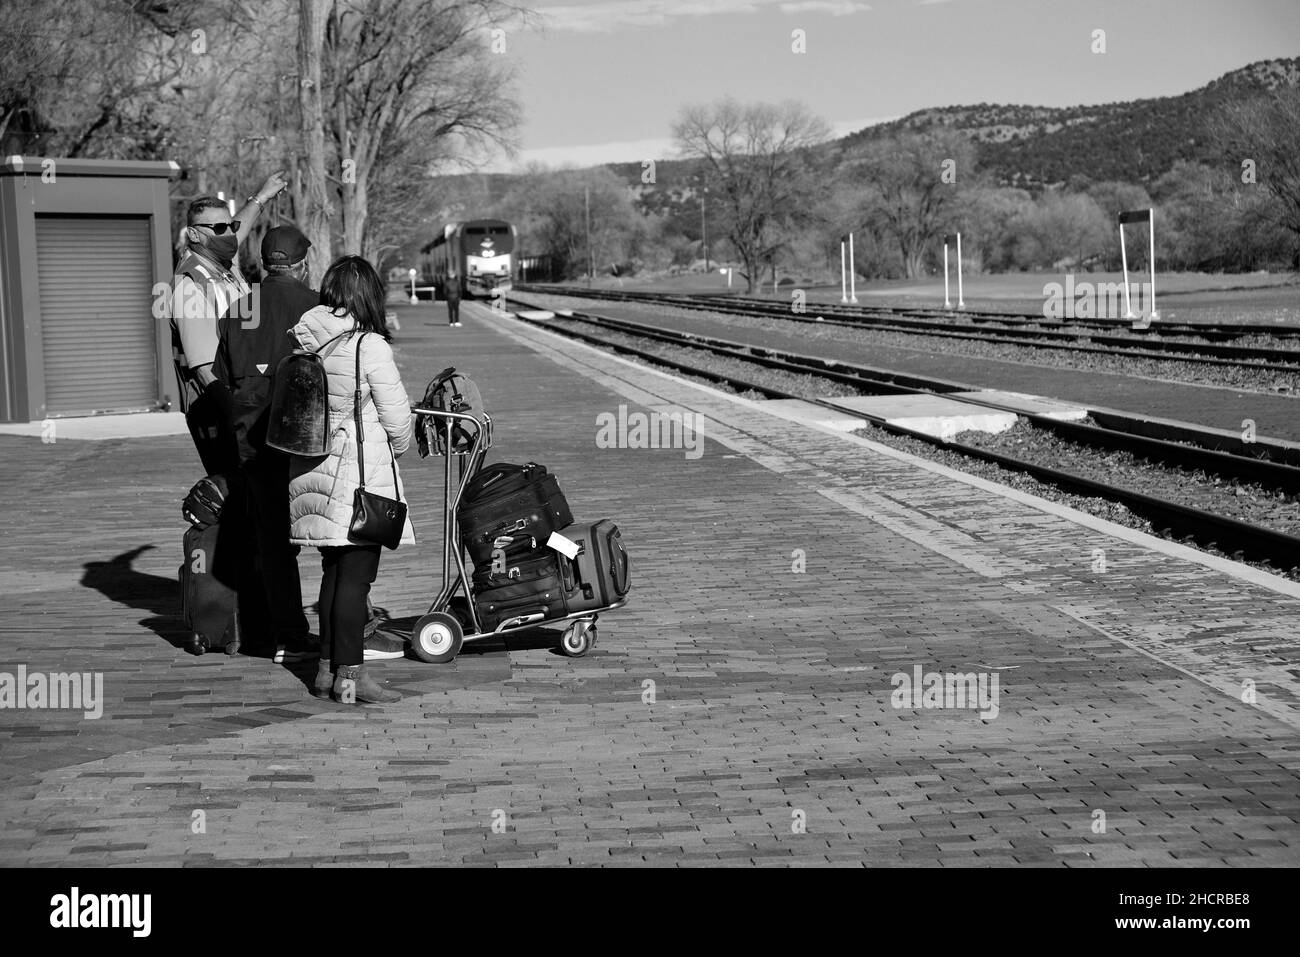 Passengers stand on the platform as an Amtrak passenger train (the Southwest Chief) arrives at the train station in Lamy, New Mexico. Stock Photo